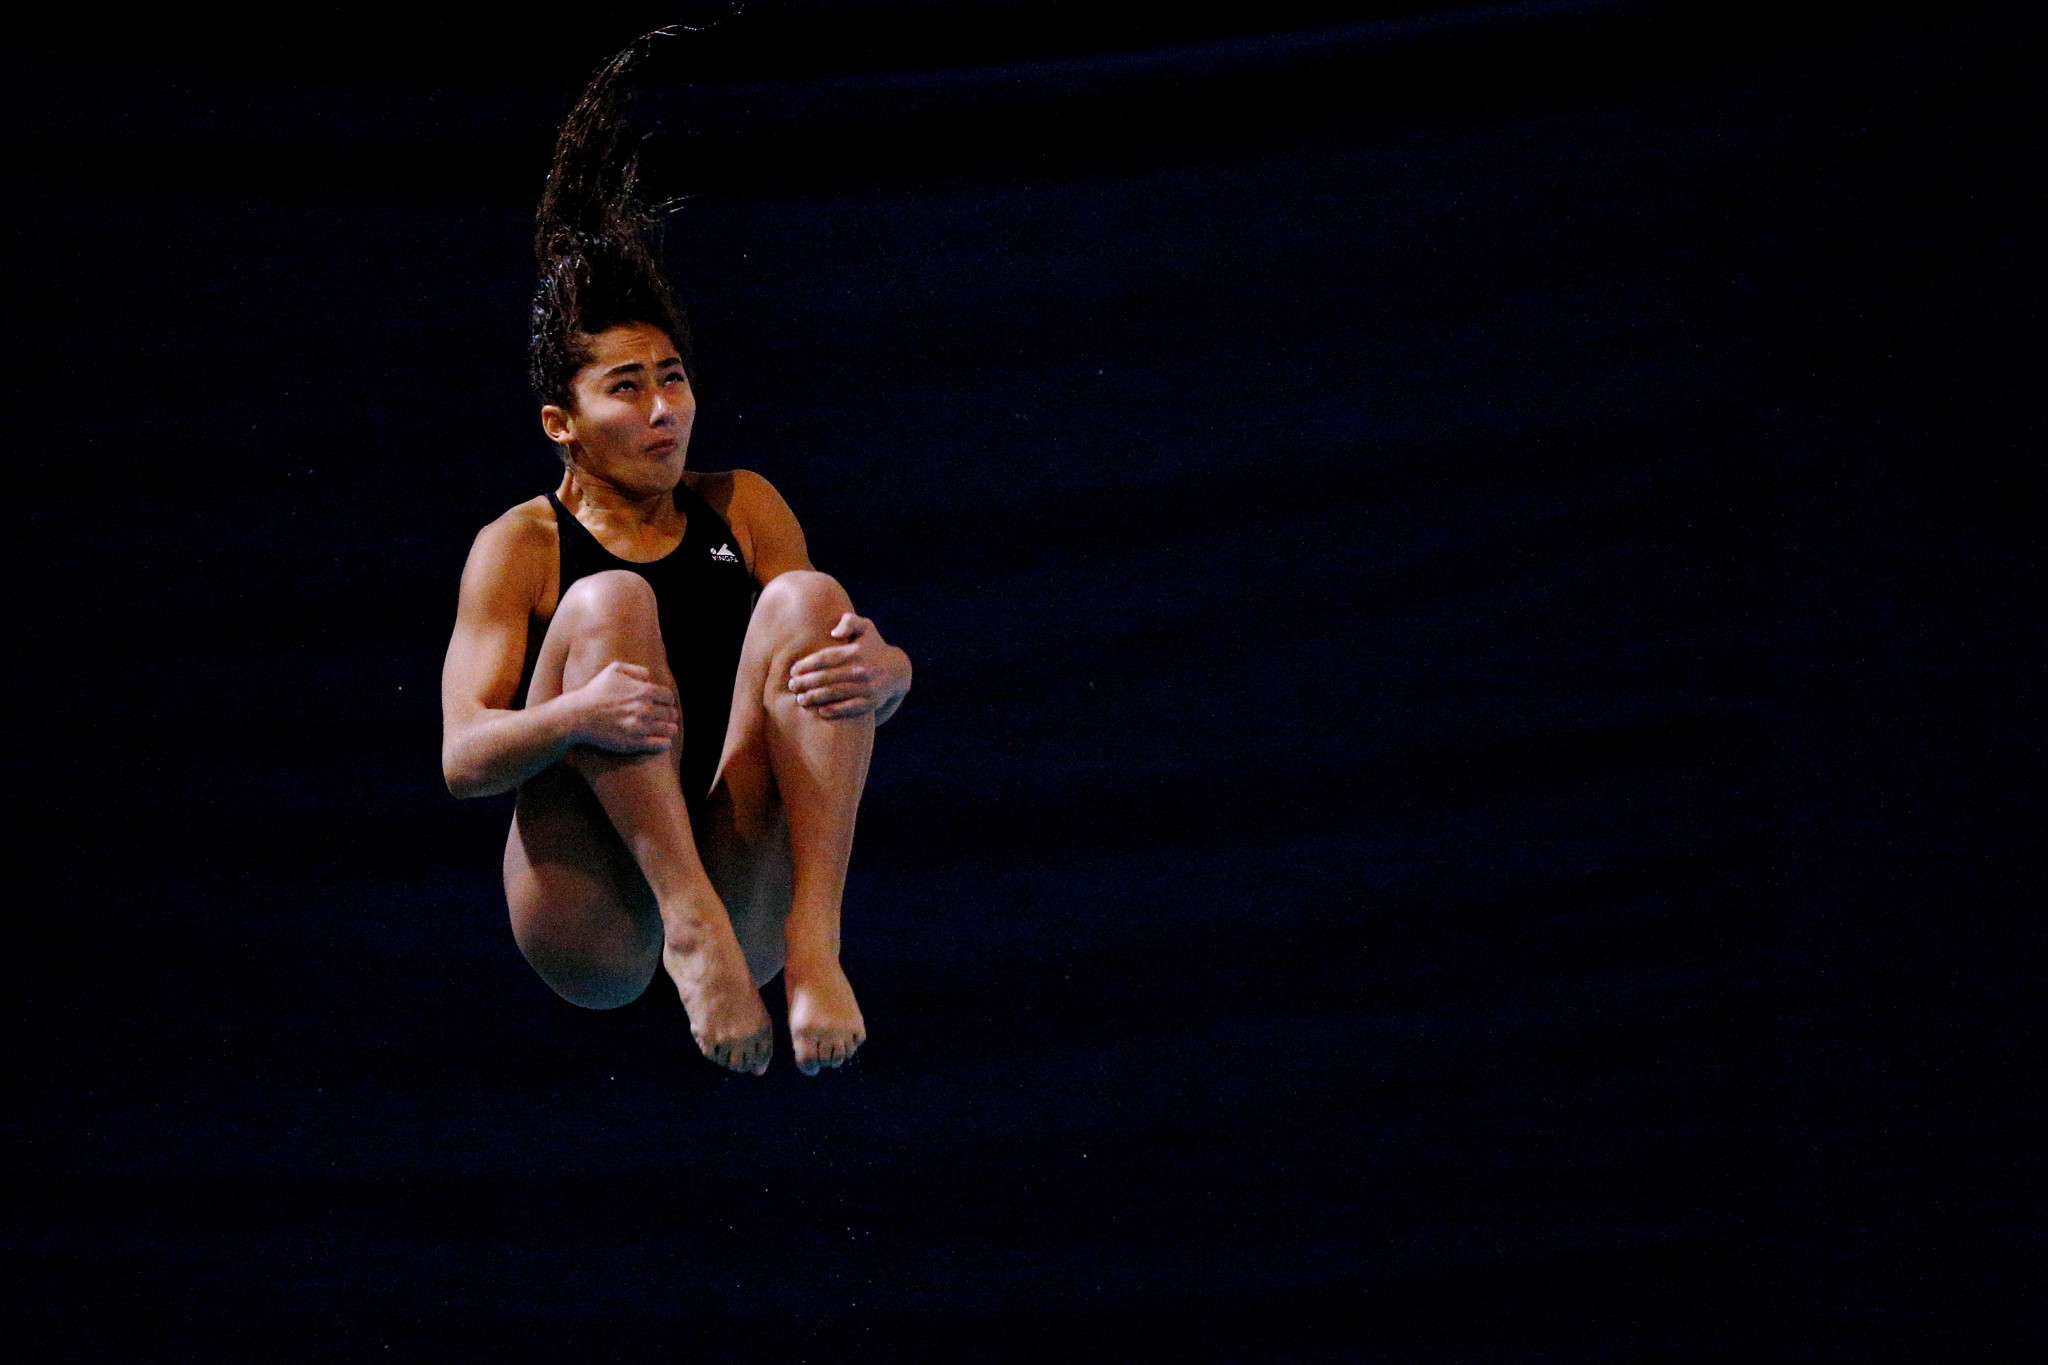 Eissa leads Egyptian podium sweep in women's 3m springboard at FINA Diving Grand Prix